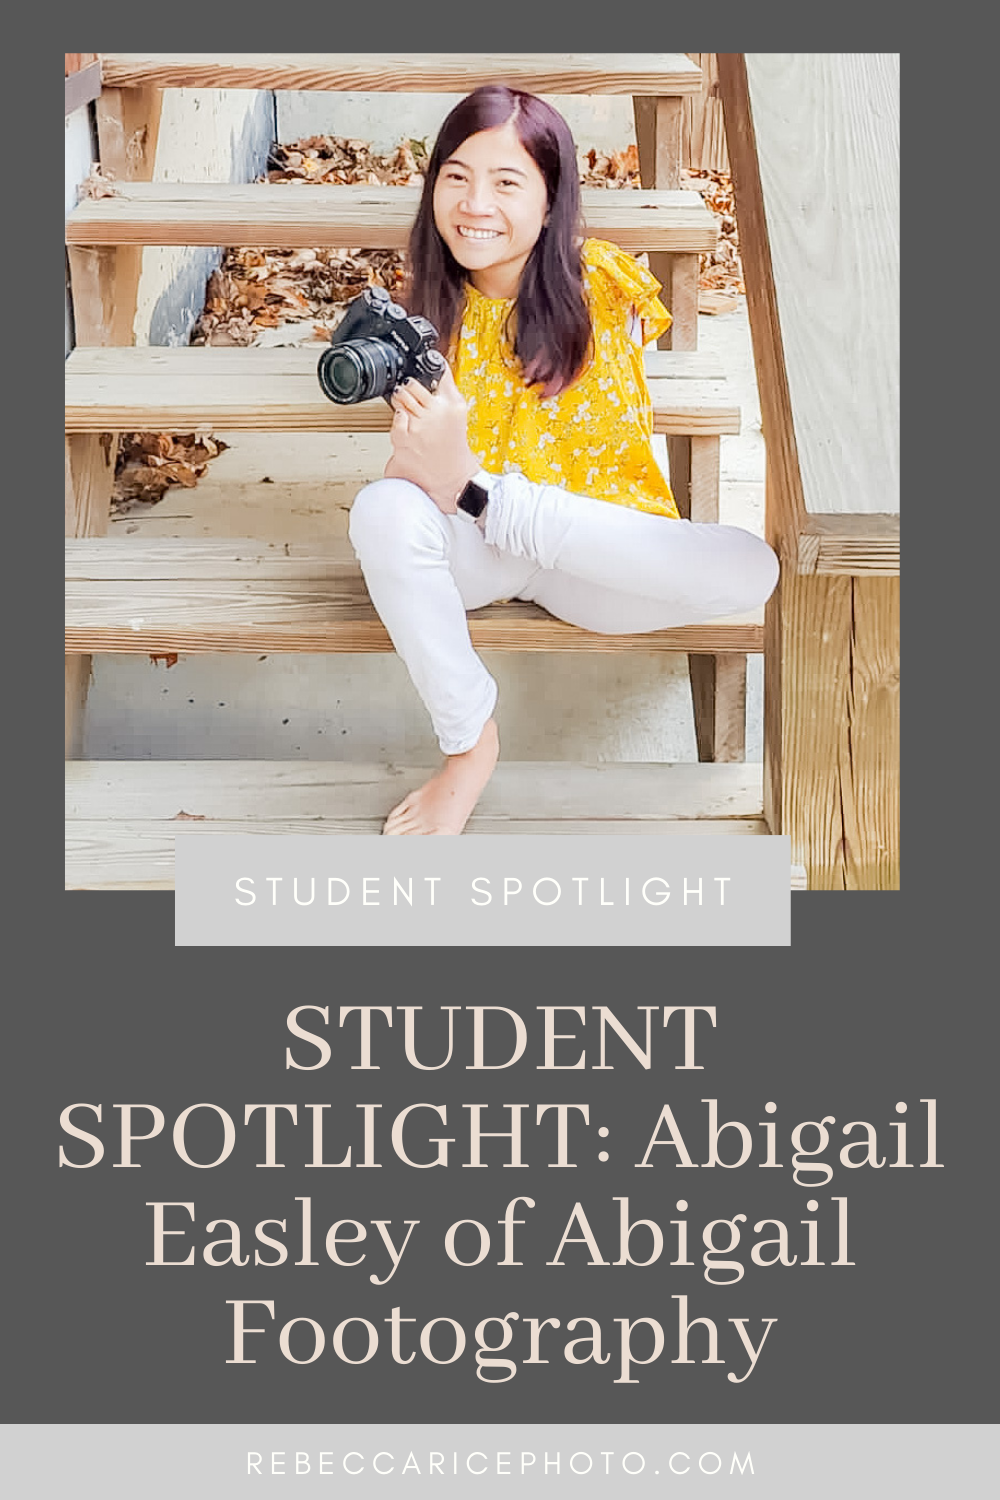 student spotlight of Abigail Easley of Abigail Footography